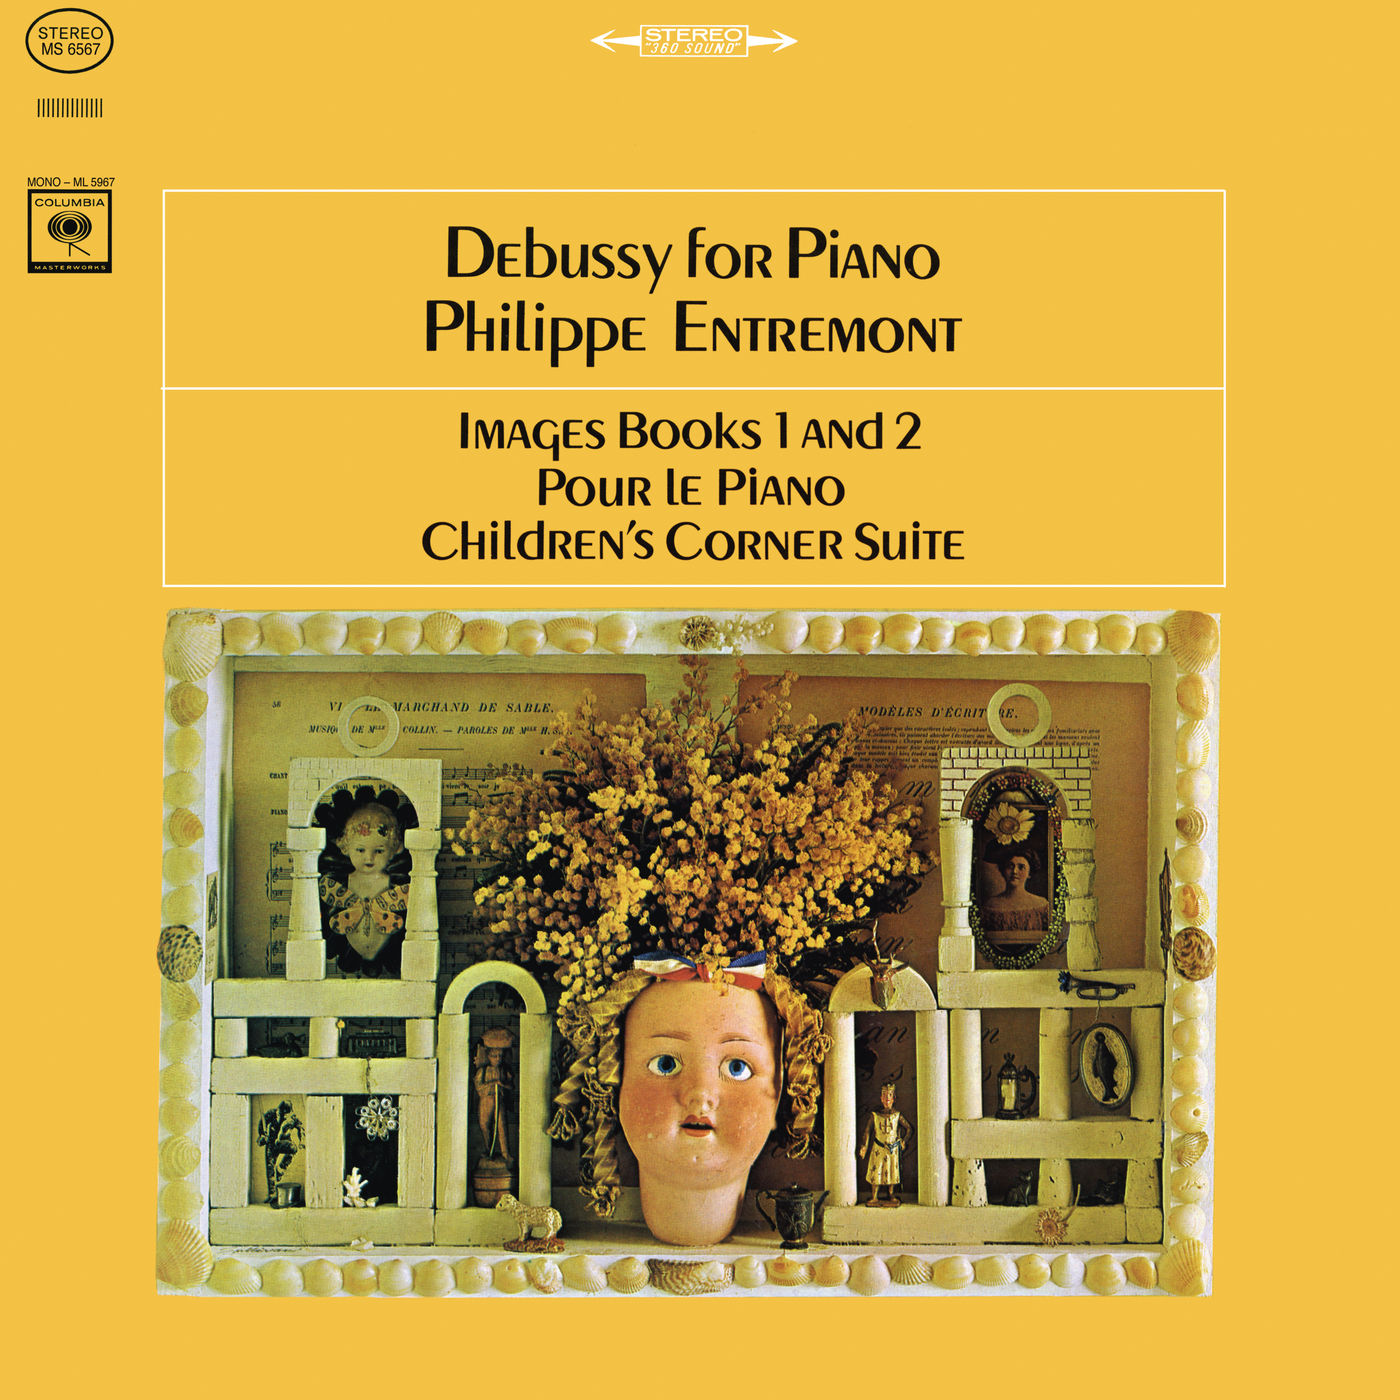 Philippe Entremont – Debussy- Images Book 1 and 2 & Pour le Piano & Children’s Corner Suite